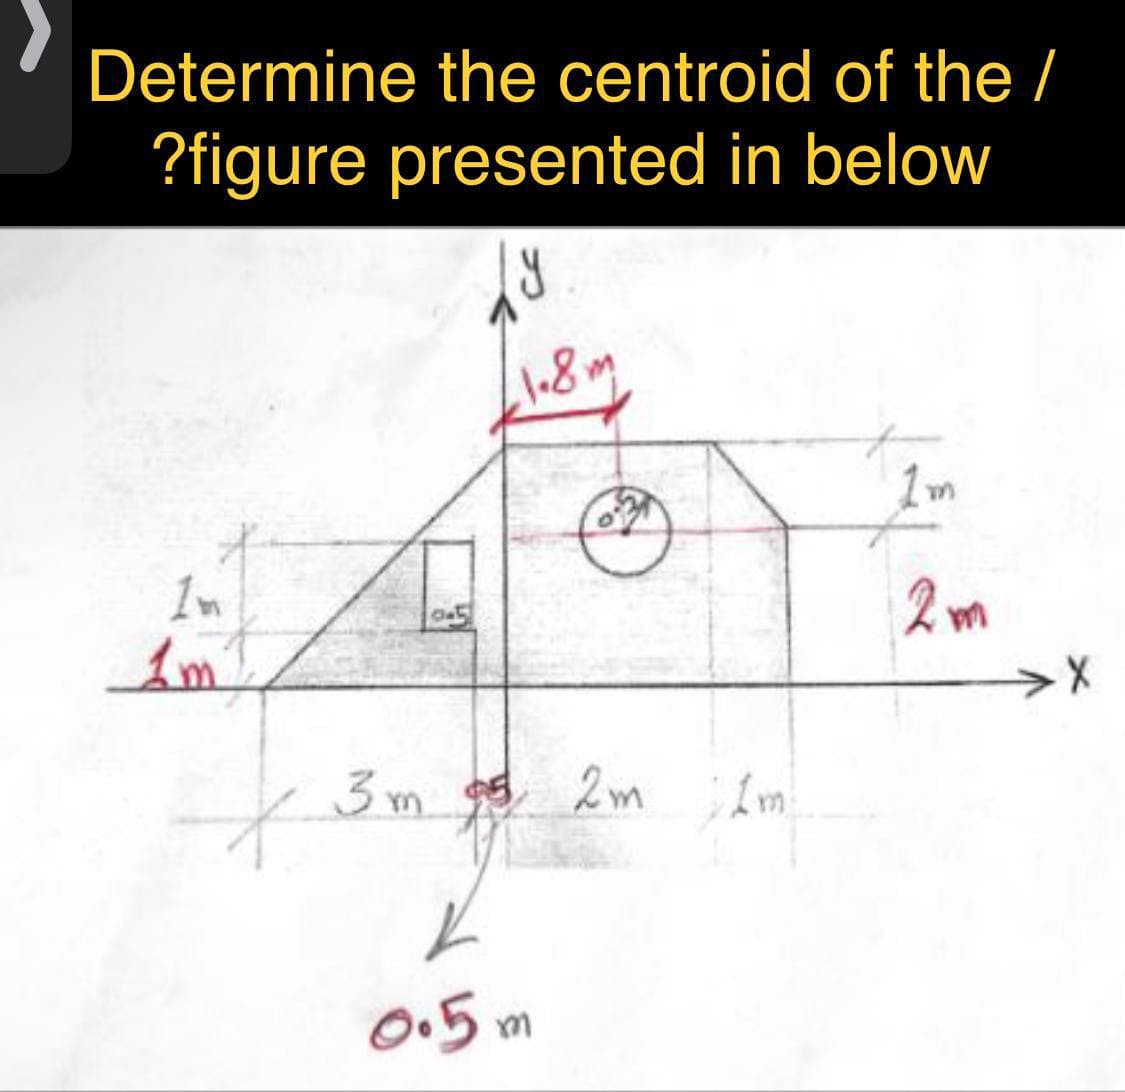 Determine the centroid of the /
?figure presented in below
ly
hơn
to
1m
1m
1m2
3m 95 2m Im
0.5m
X
2m